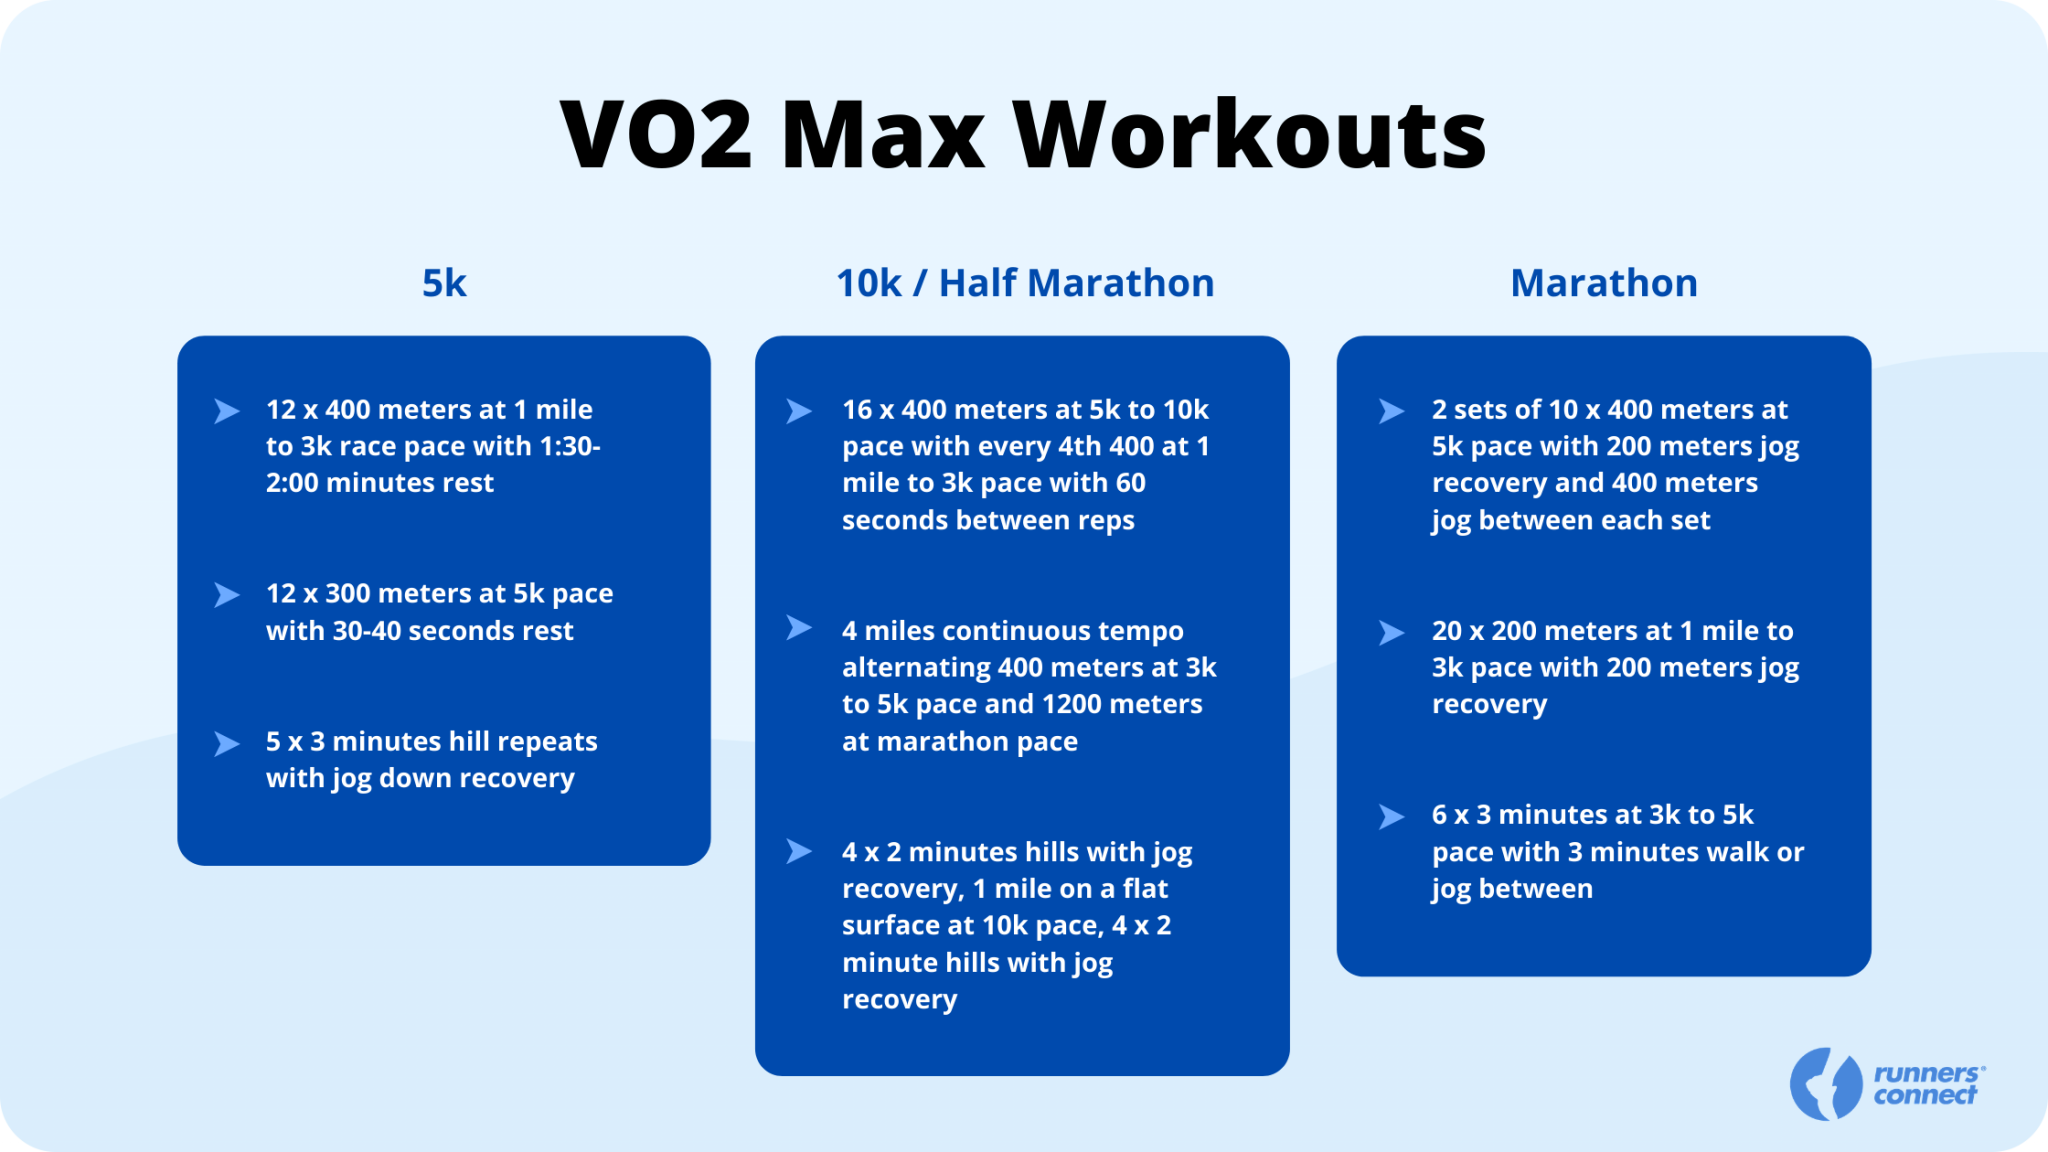 Vo2 Max Workouts 2 